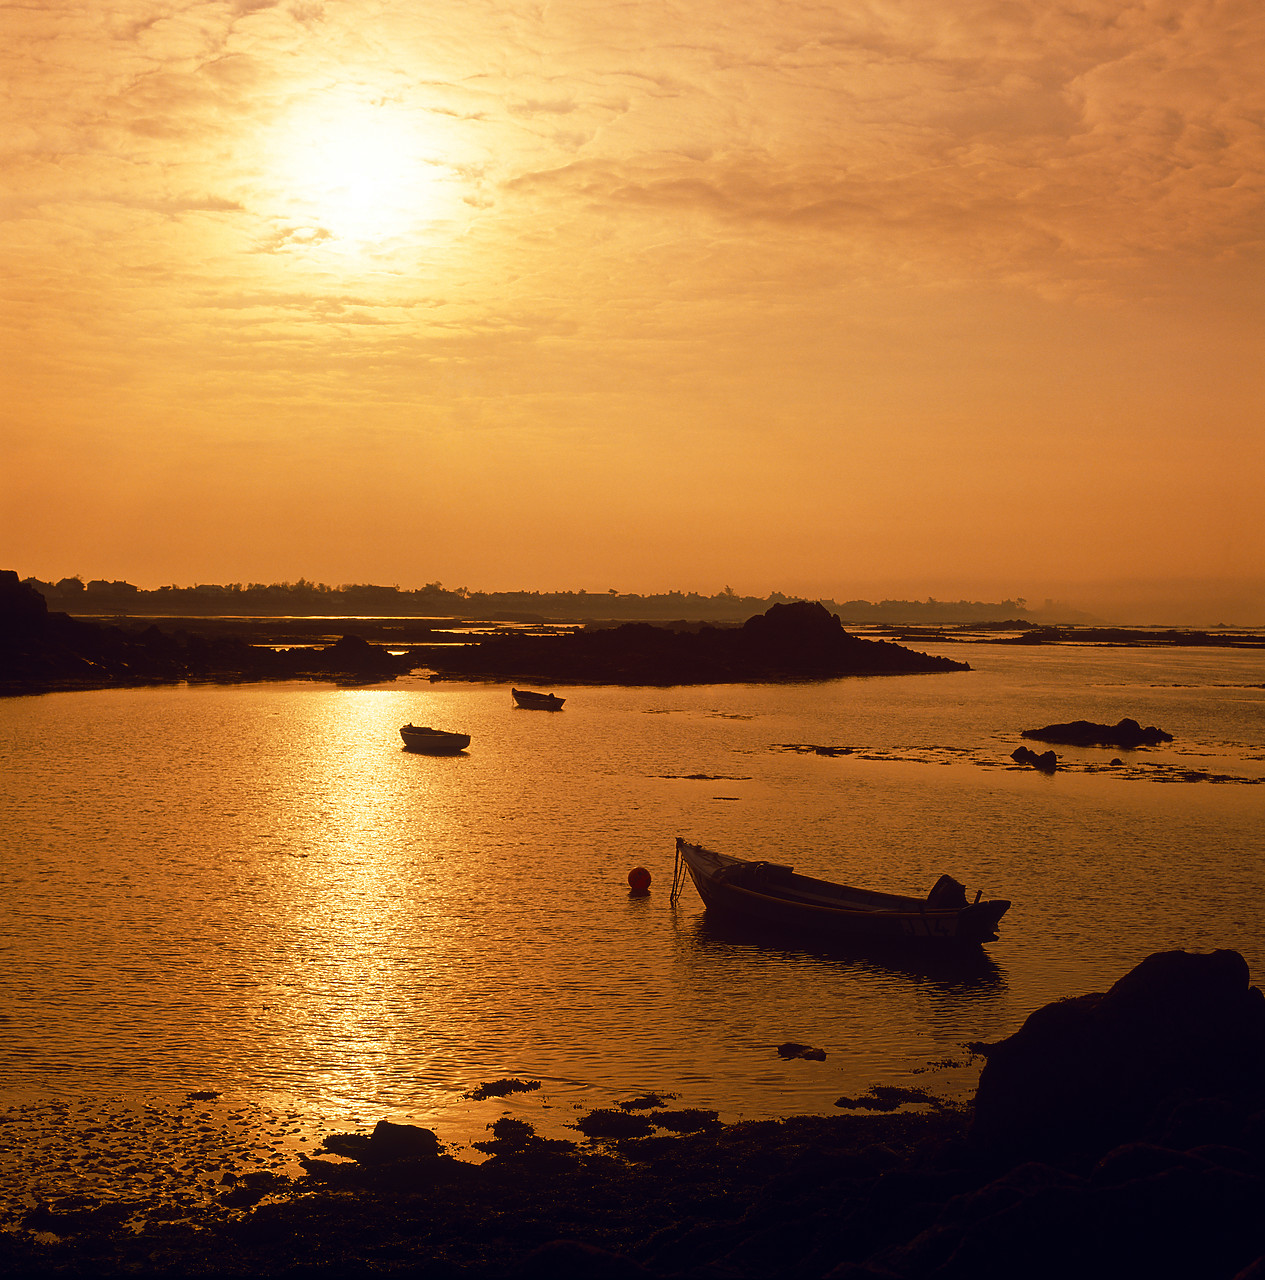 #913540-2 - Boats at LA Rocque Point, Jersey, Channel Islands